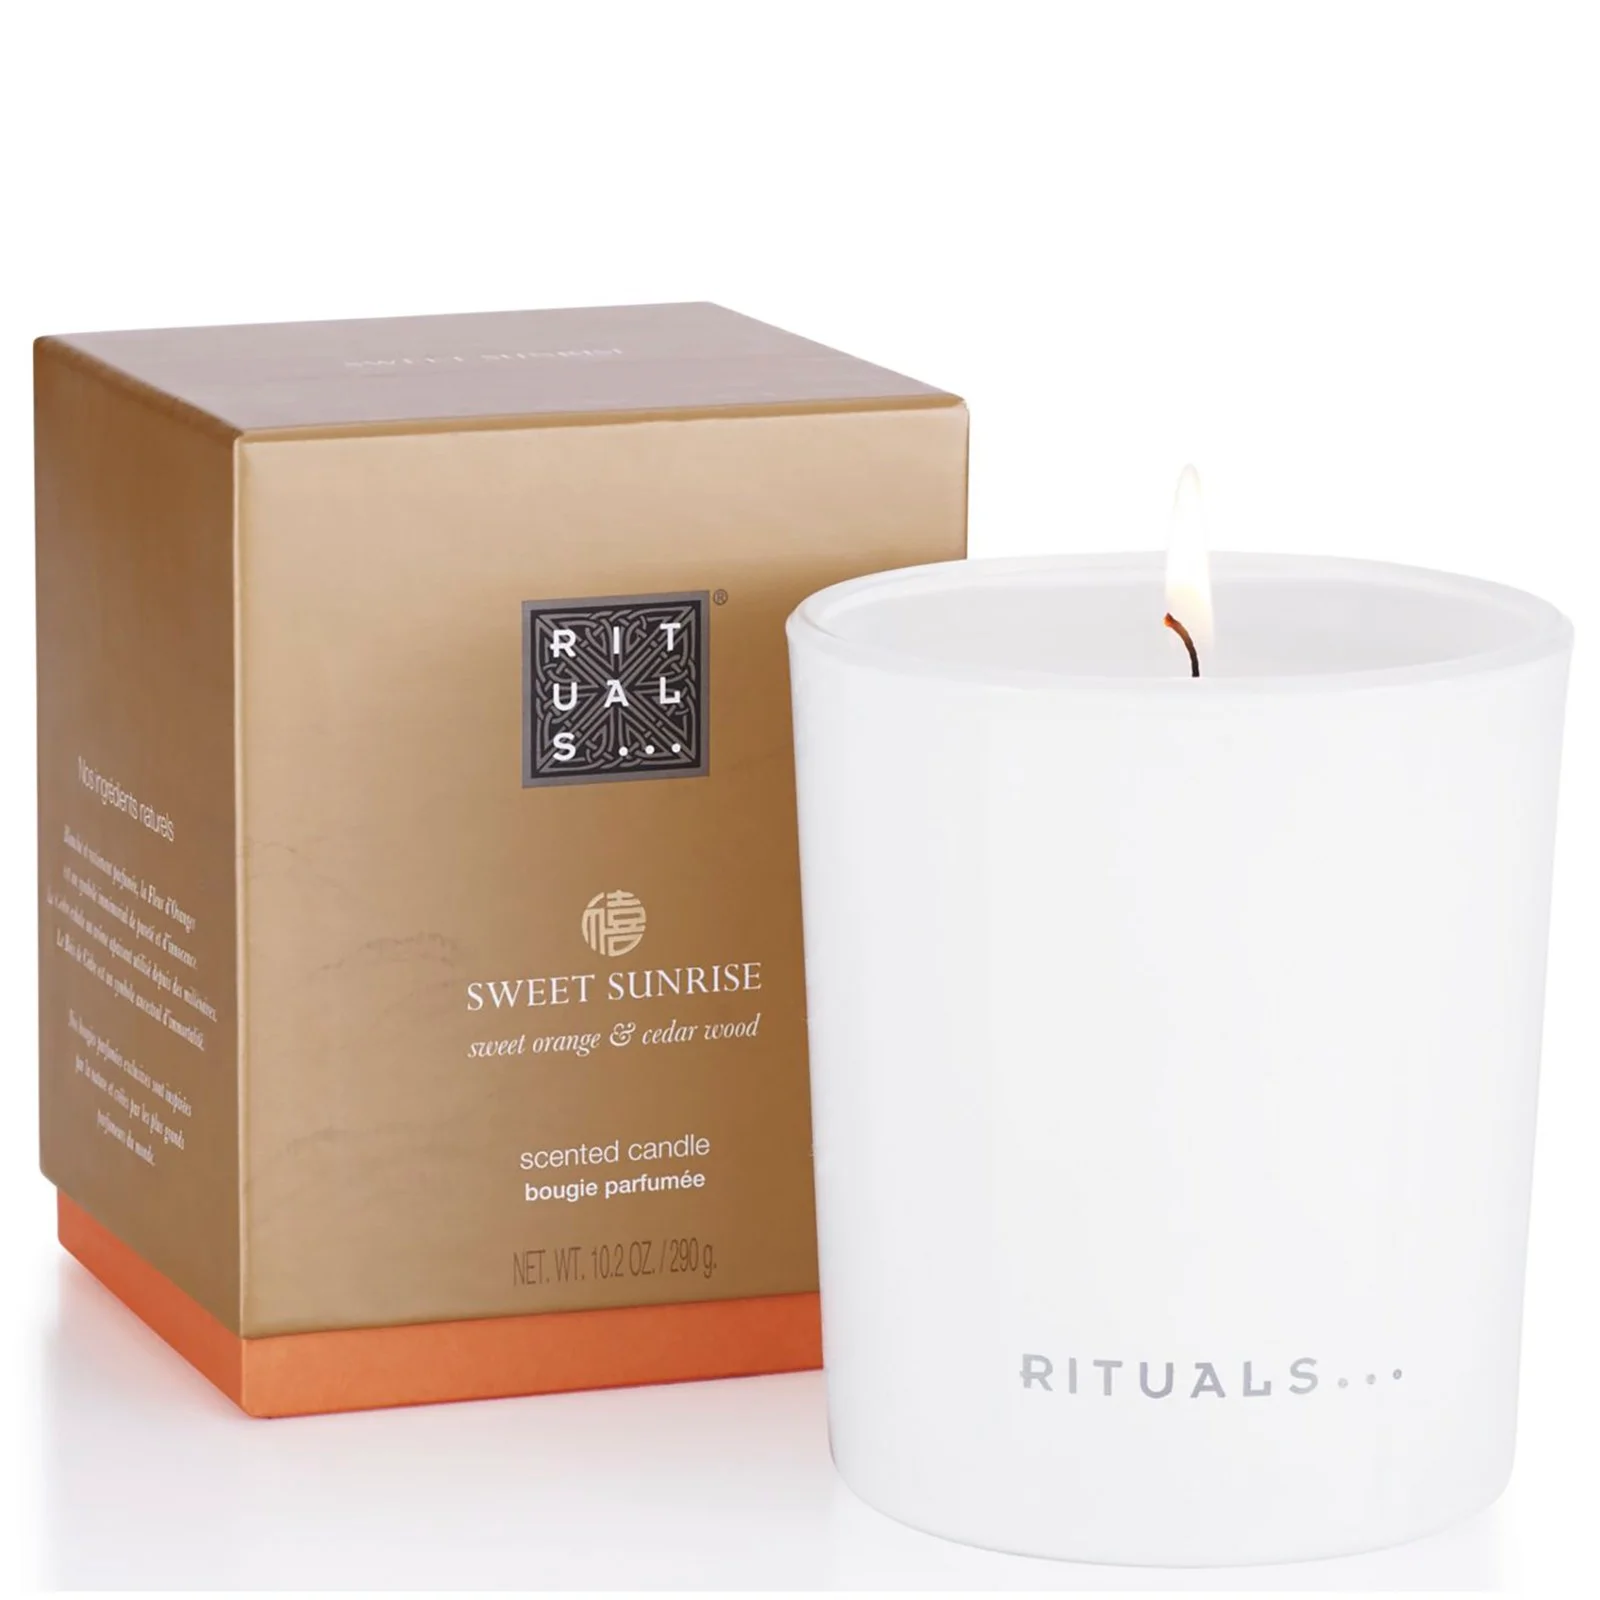 Rituals Sweet Sunrise Scented Candle (290g) Image 1